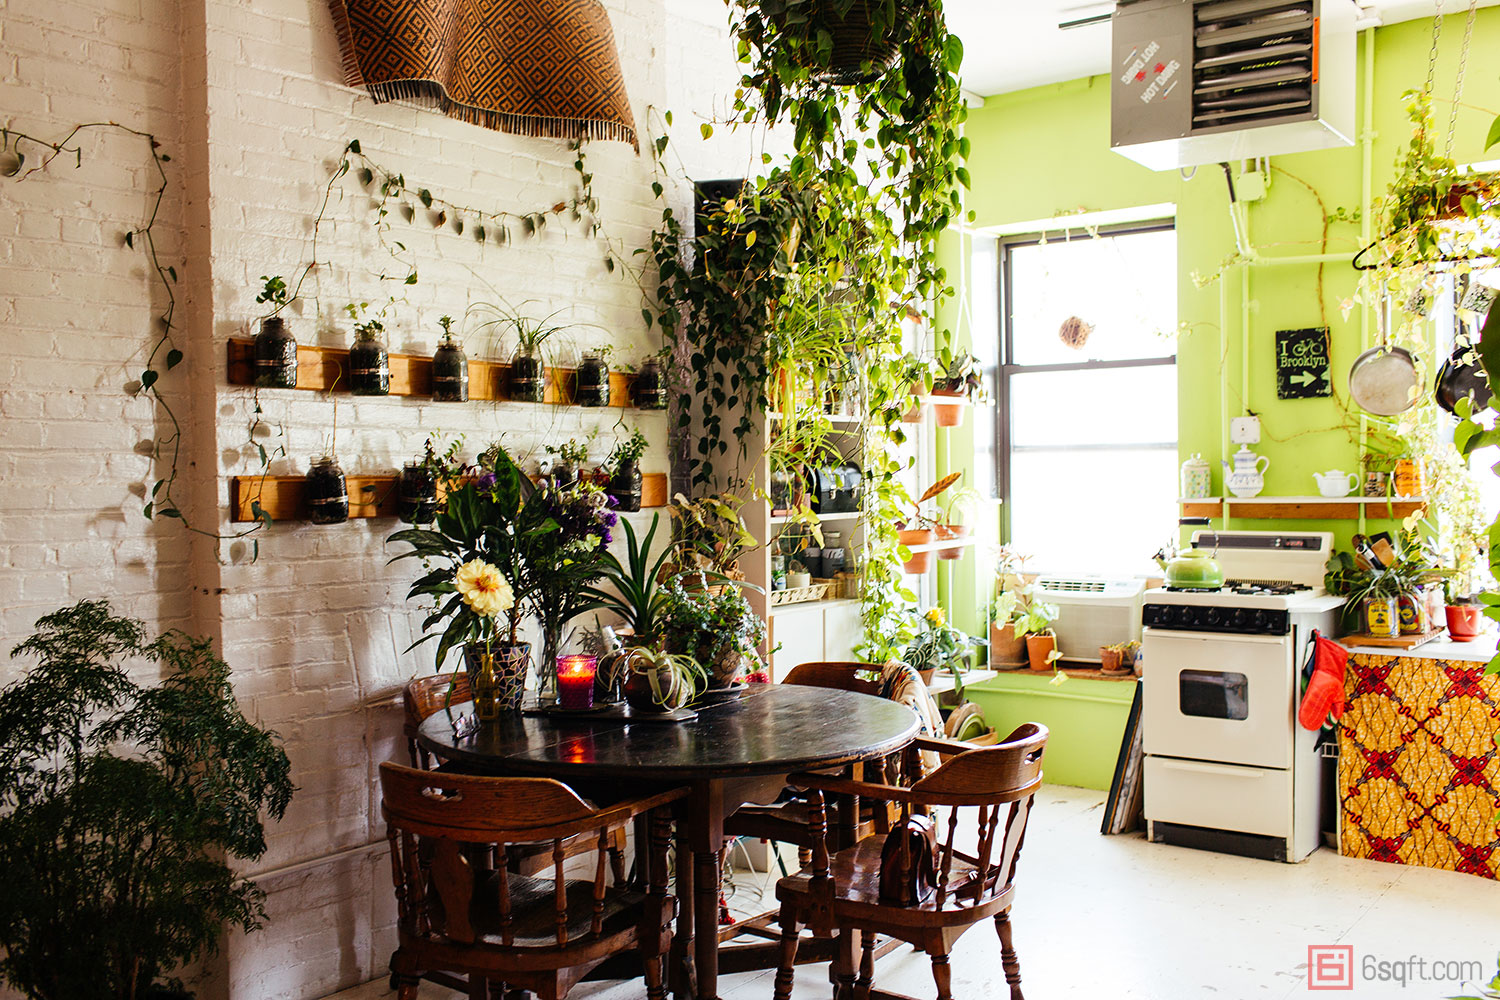 Summer-Rayne-Oakes-Plant-Filled-Apartment-in-Williamsburg-Brooklyn-kitchen.jpg